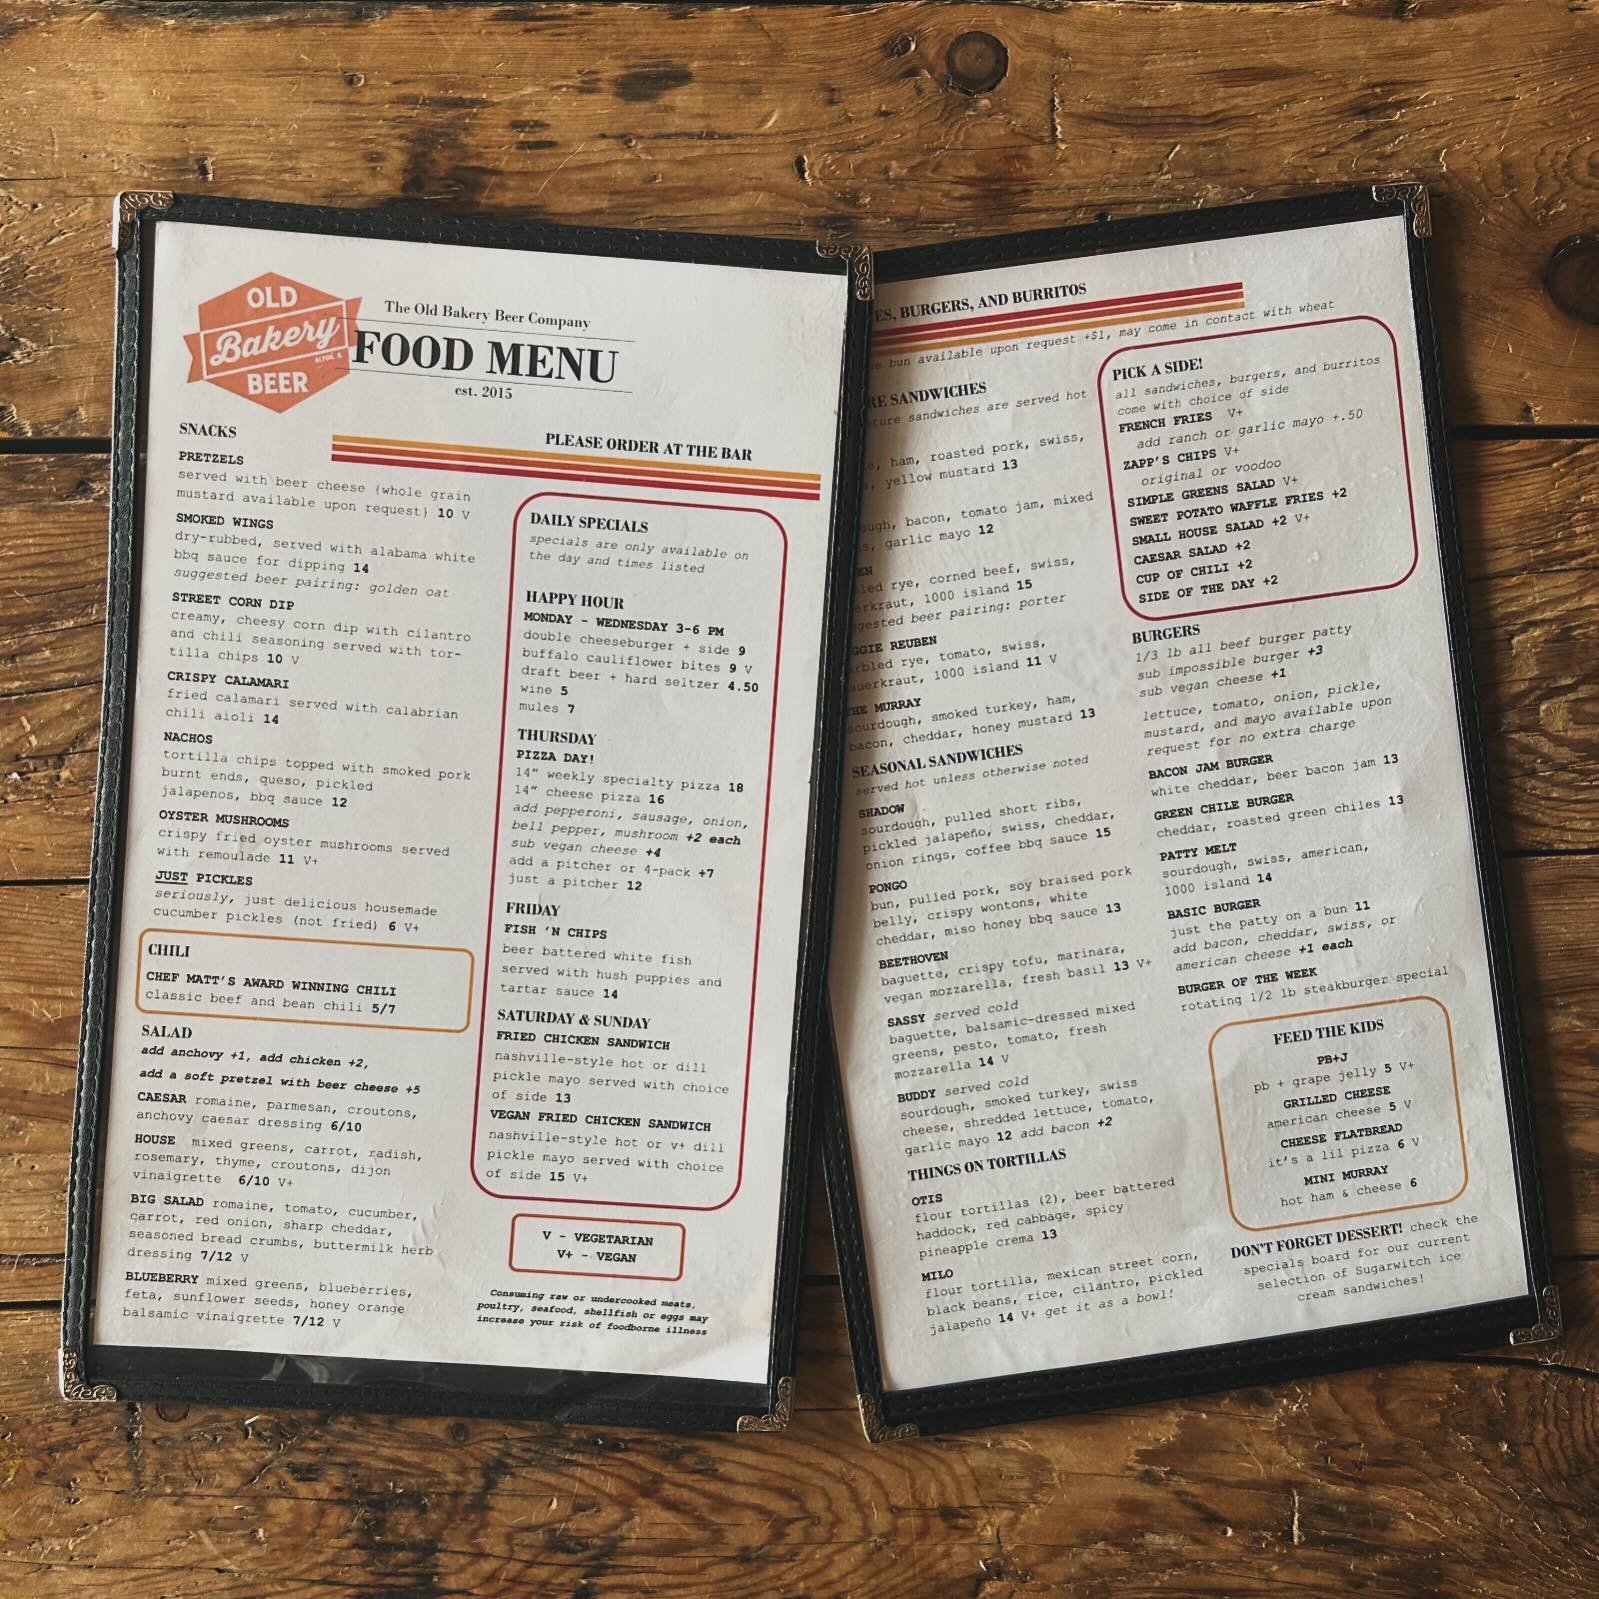 Still closed today, but here is a sneak peak at our new Summer Menu so you can figure out your order for tomorrow!  View the full menu at www.oldbakerybeer.com/food